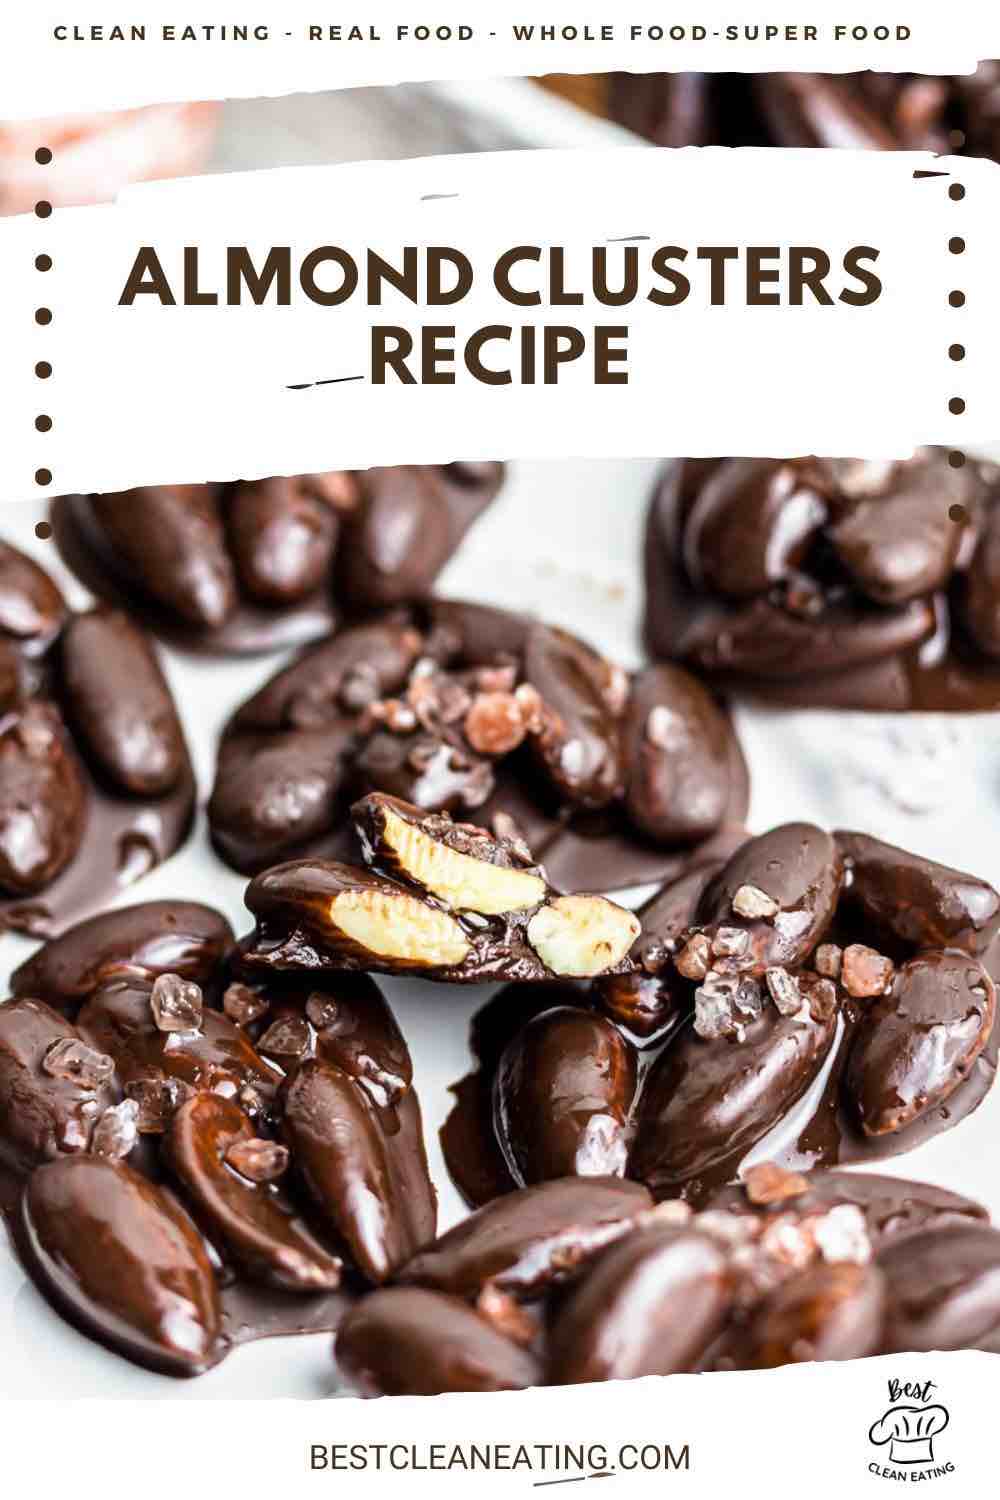 Almond clusters recipe on a baking sheet.